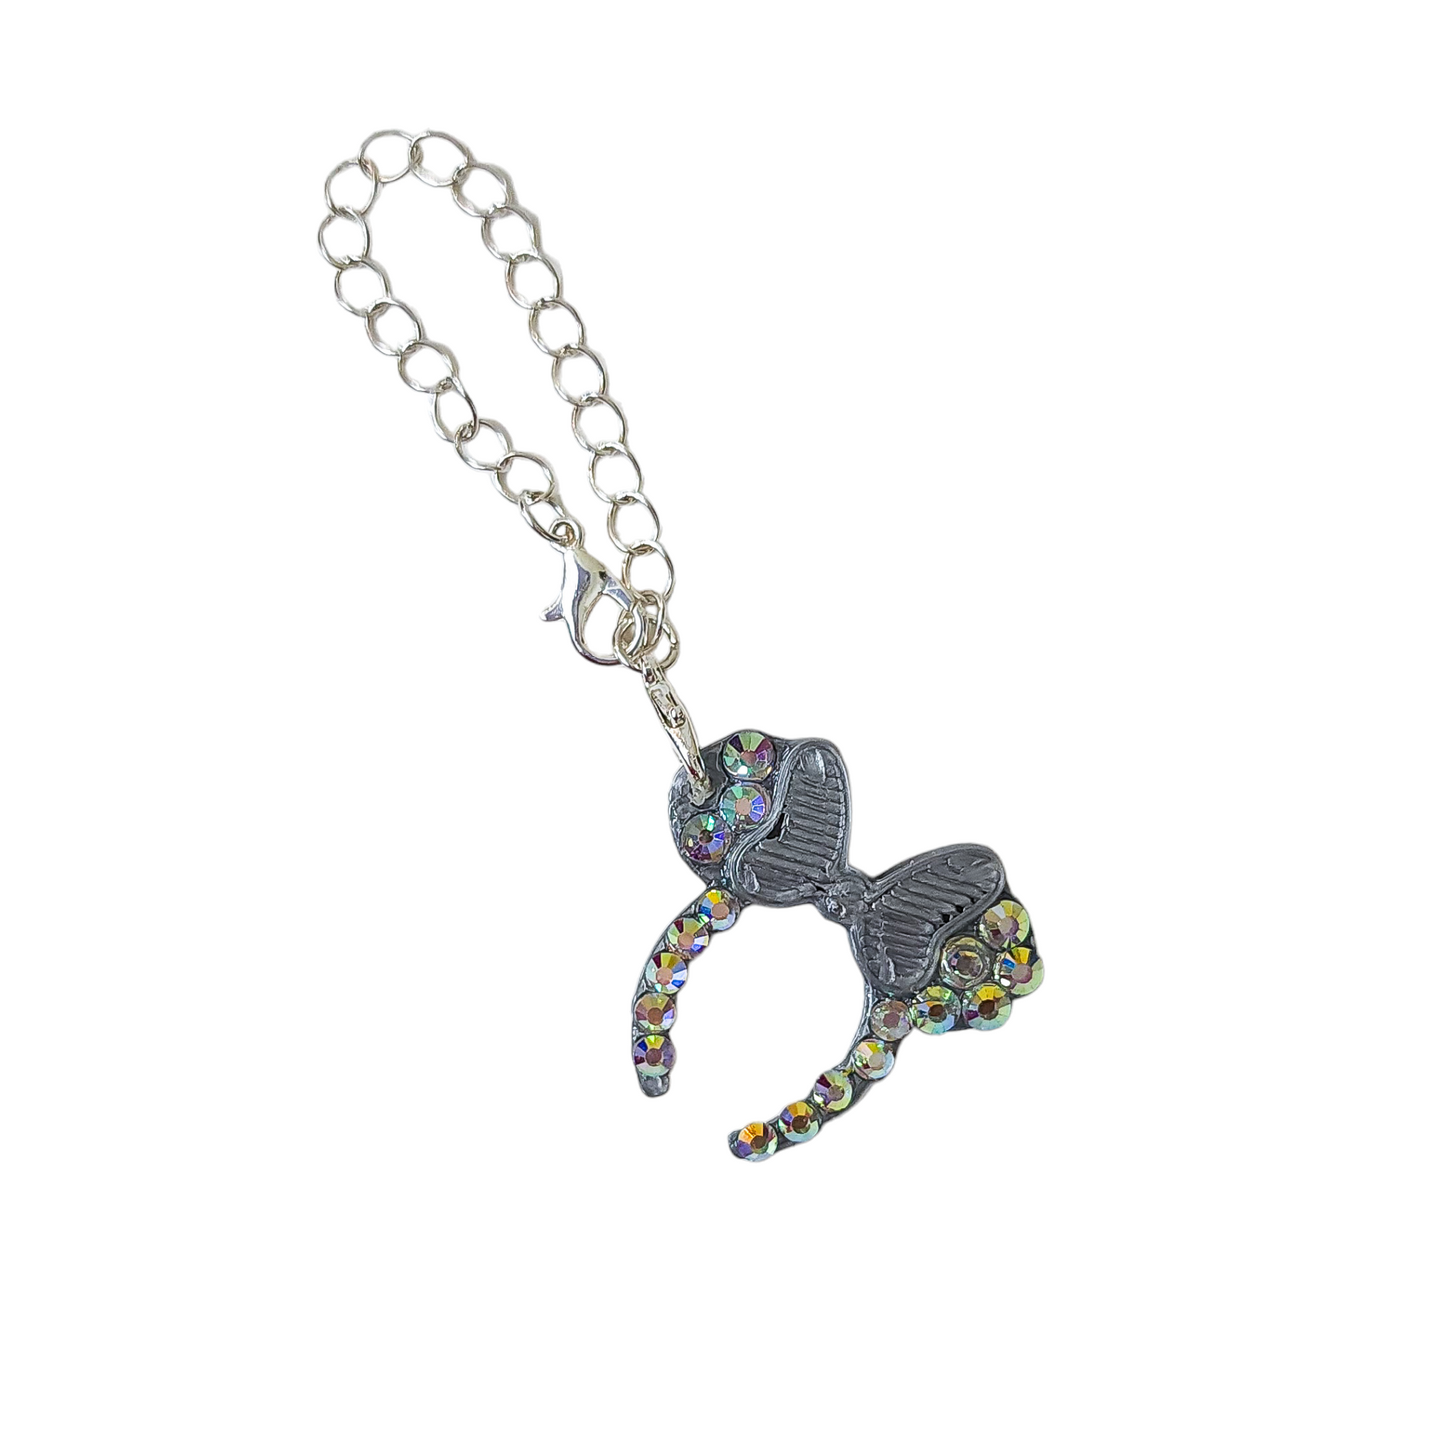 Tumbler charm 1 mouse headband with rhinestones. Gold or silver chain